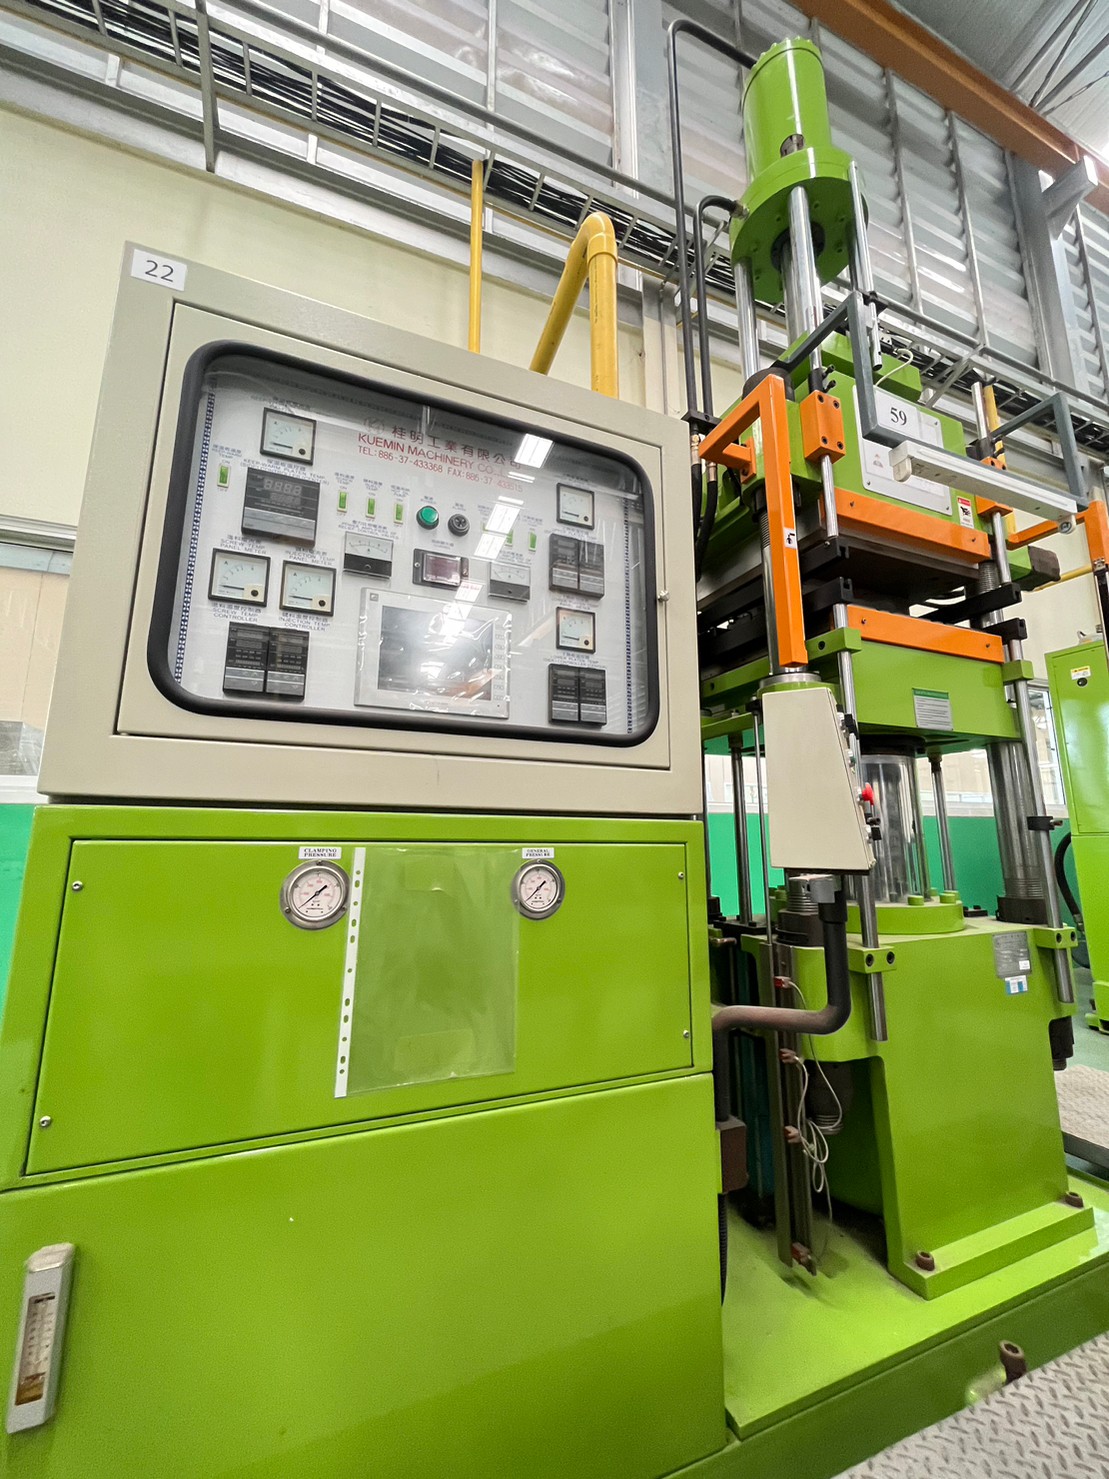 RUBBER INJECTION MOLDING 200 Ton